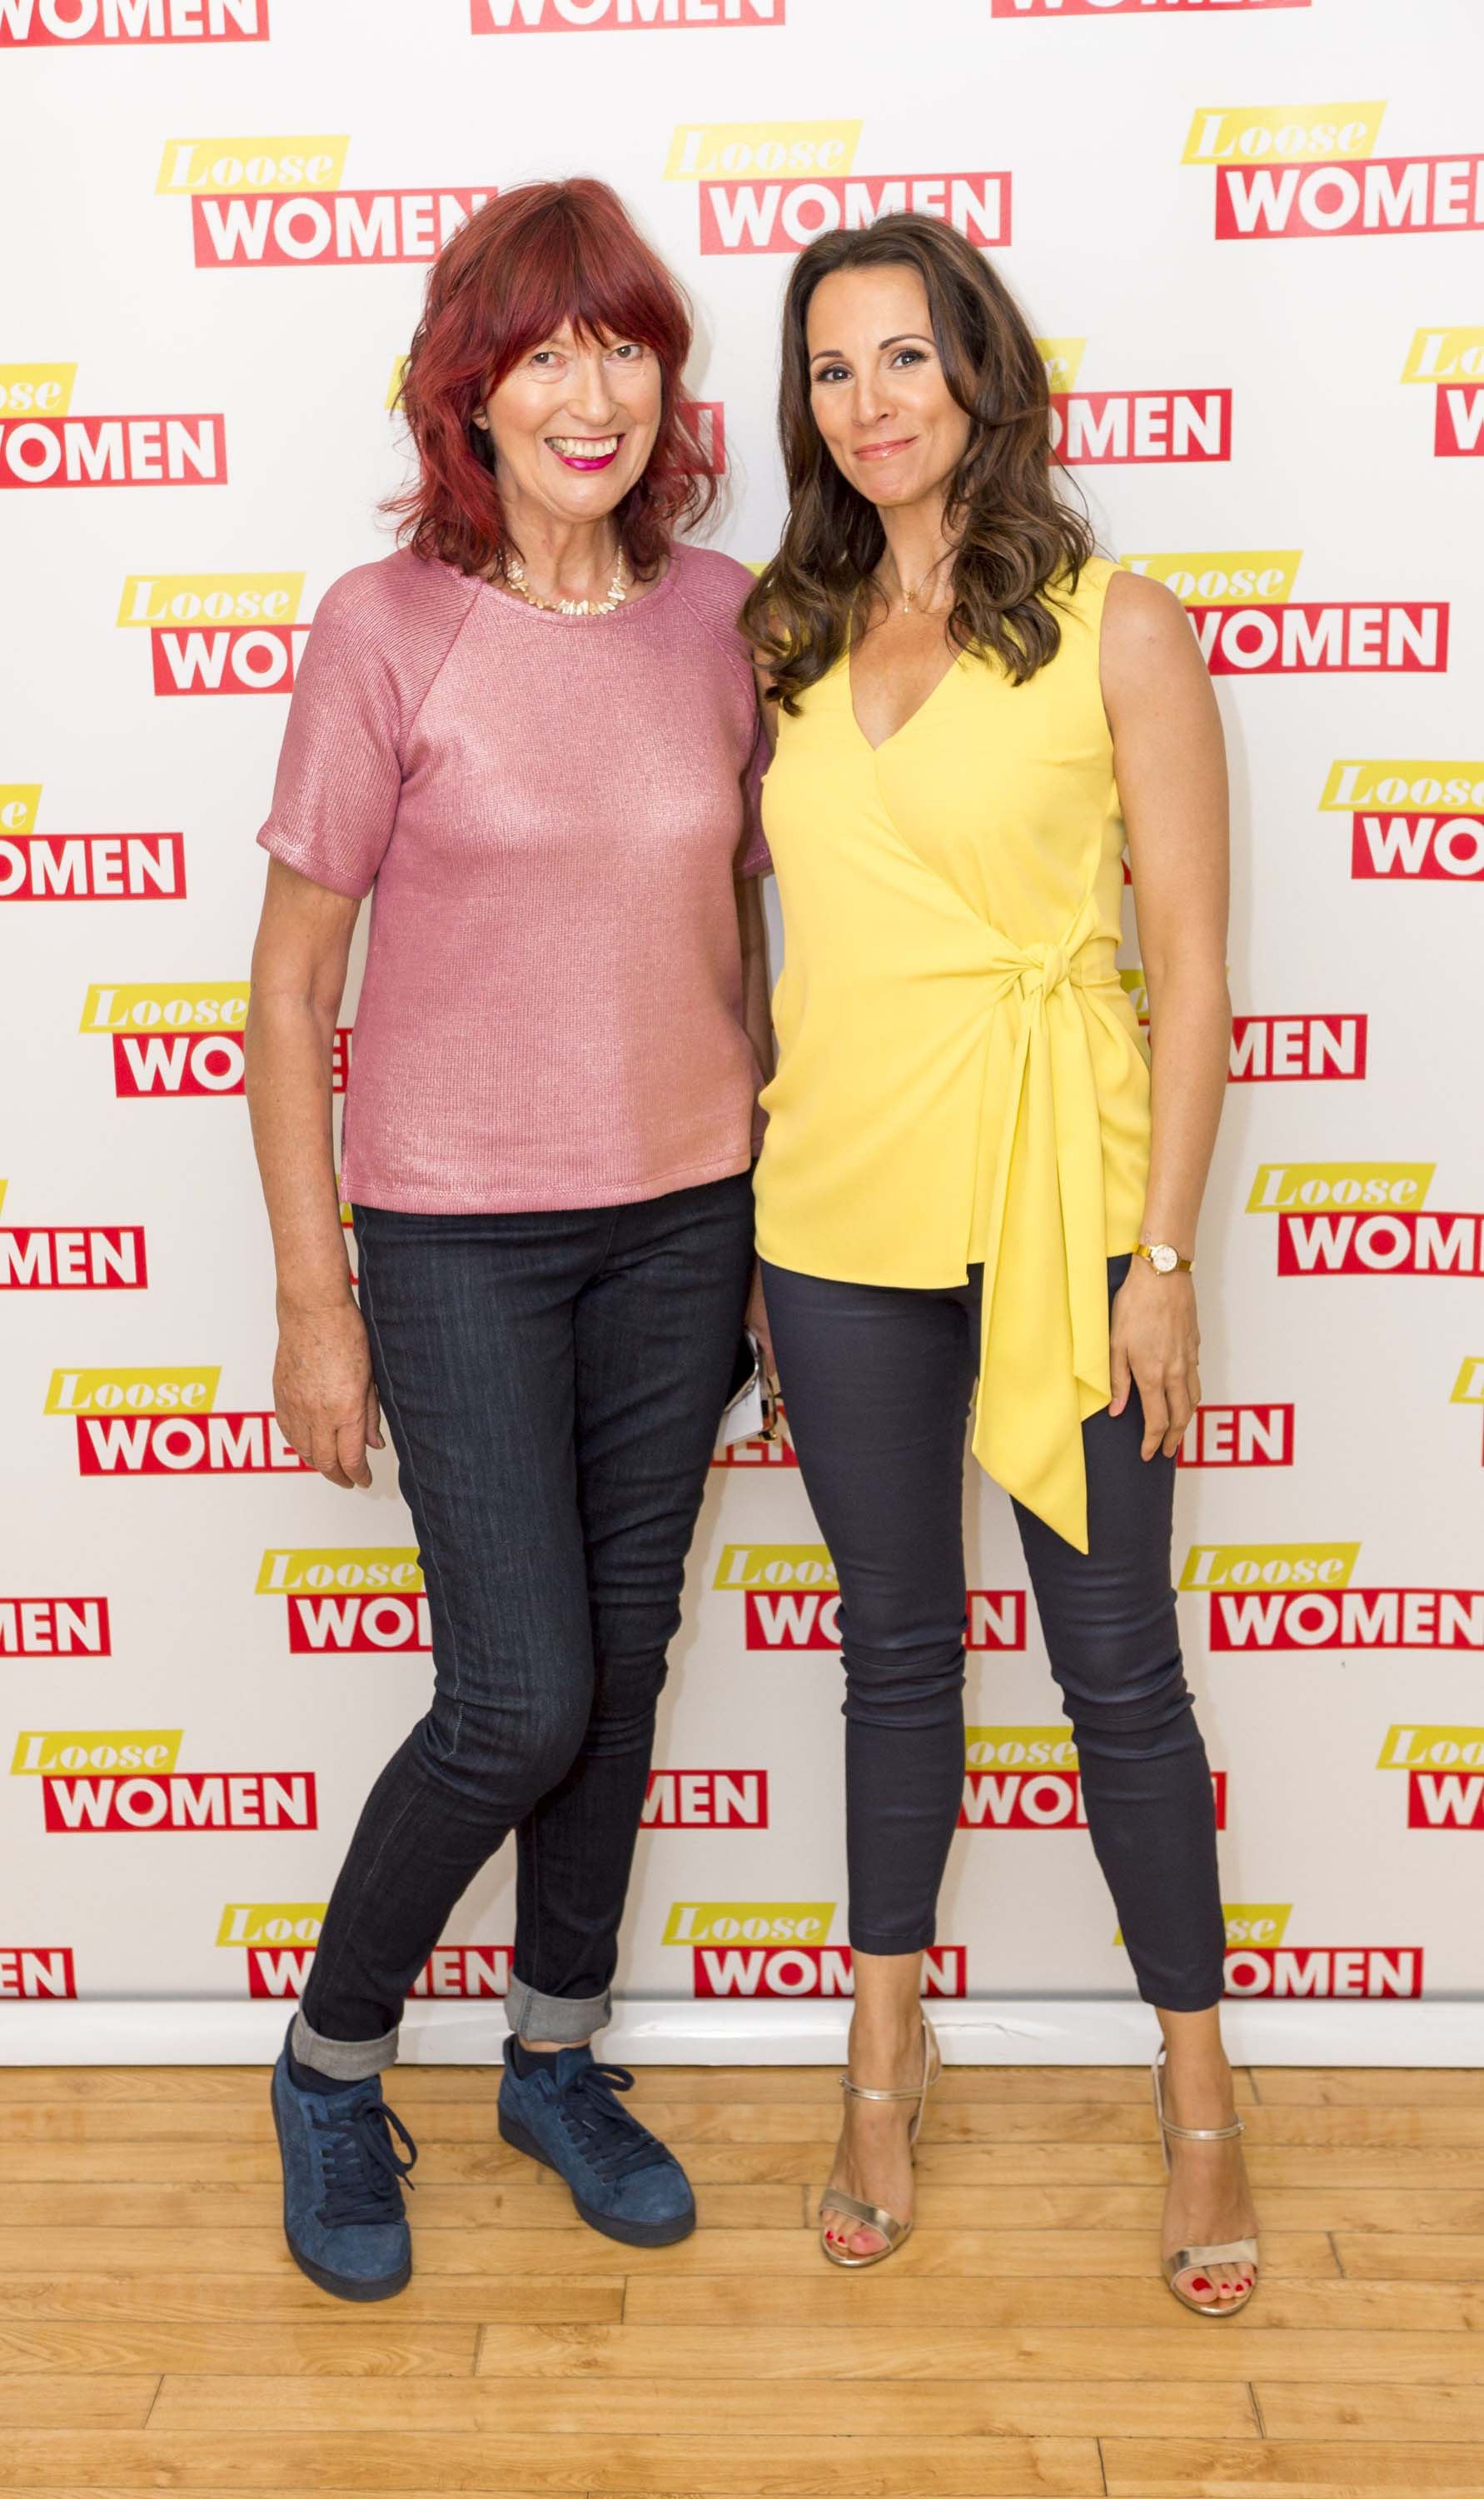 Andrea McLean attends Loose Women TV show